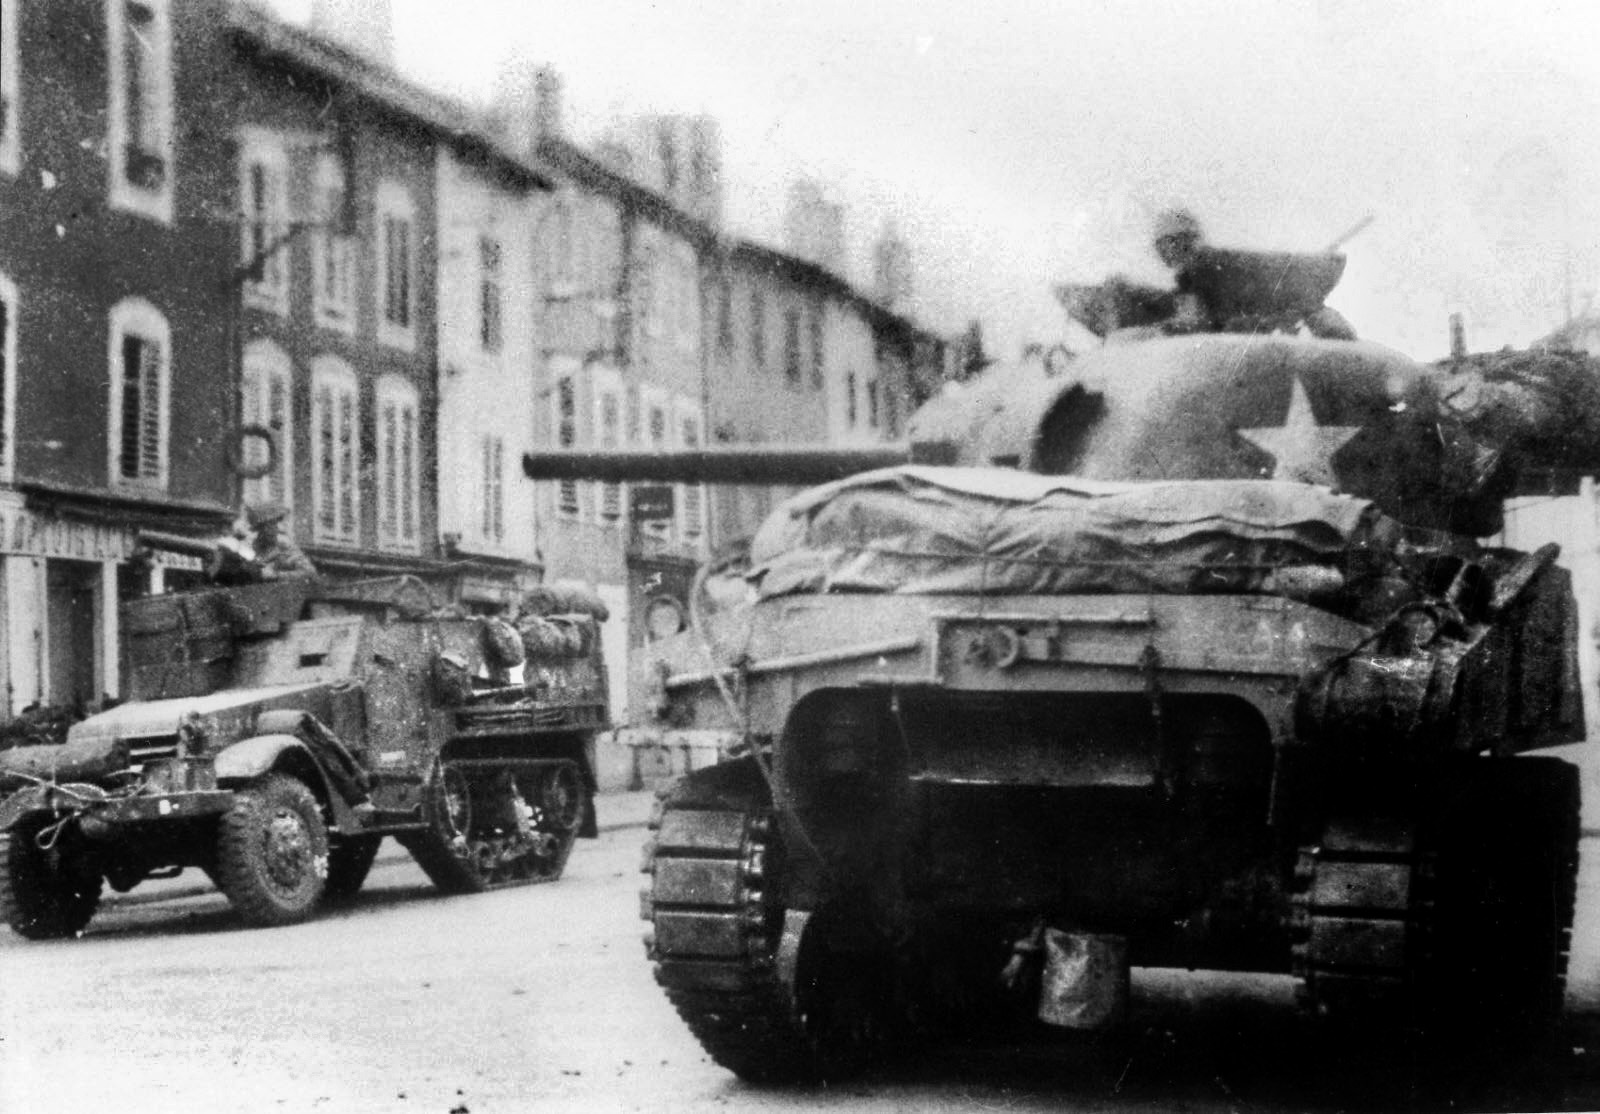 An American tank and halftrack sit motionless on a street in the French town of Luneville. The U.S. 2nd Cavalry Regiment fought a German advance to a standstill in the autumn of 1944, thwarting an attempt to cut off the U.S. 4th Armored Division, one of the premiere fighting units of General George S. Patton’s Third Army. 